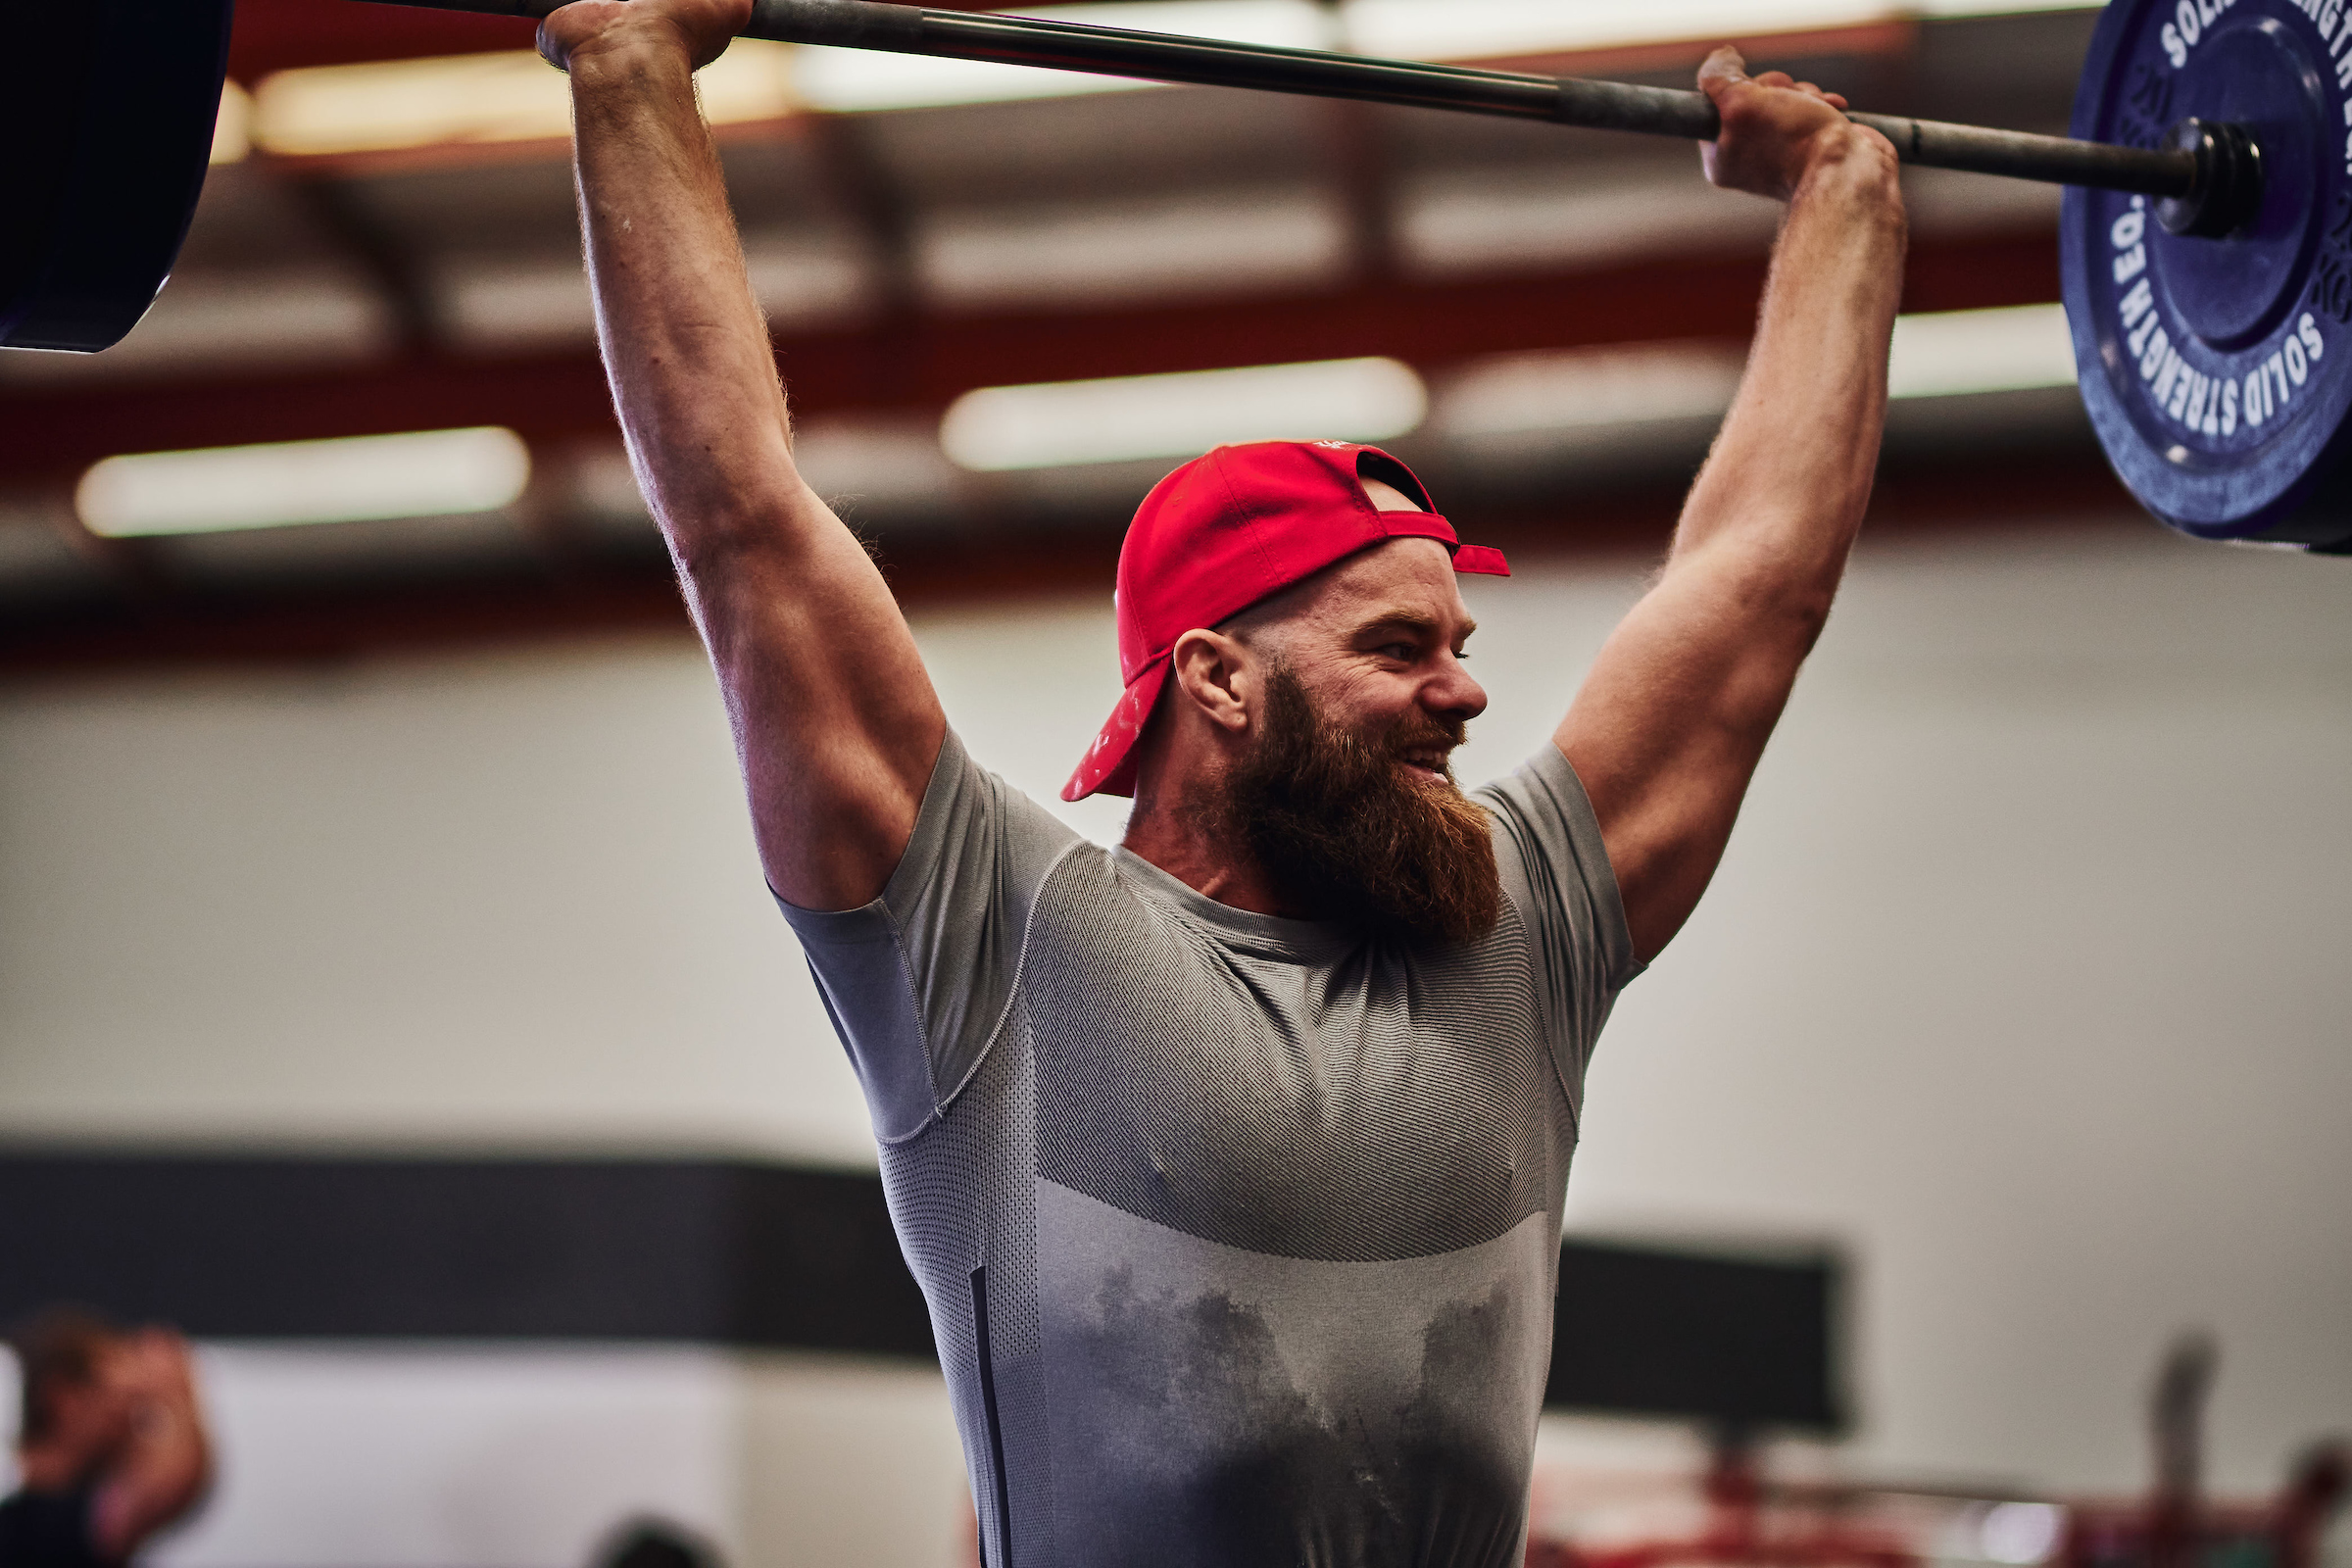 crossfit and functional fitness auckland - renegade fitness